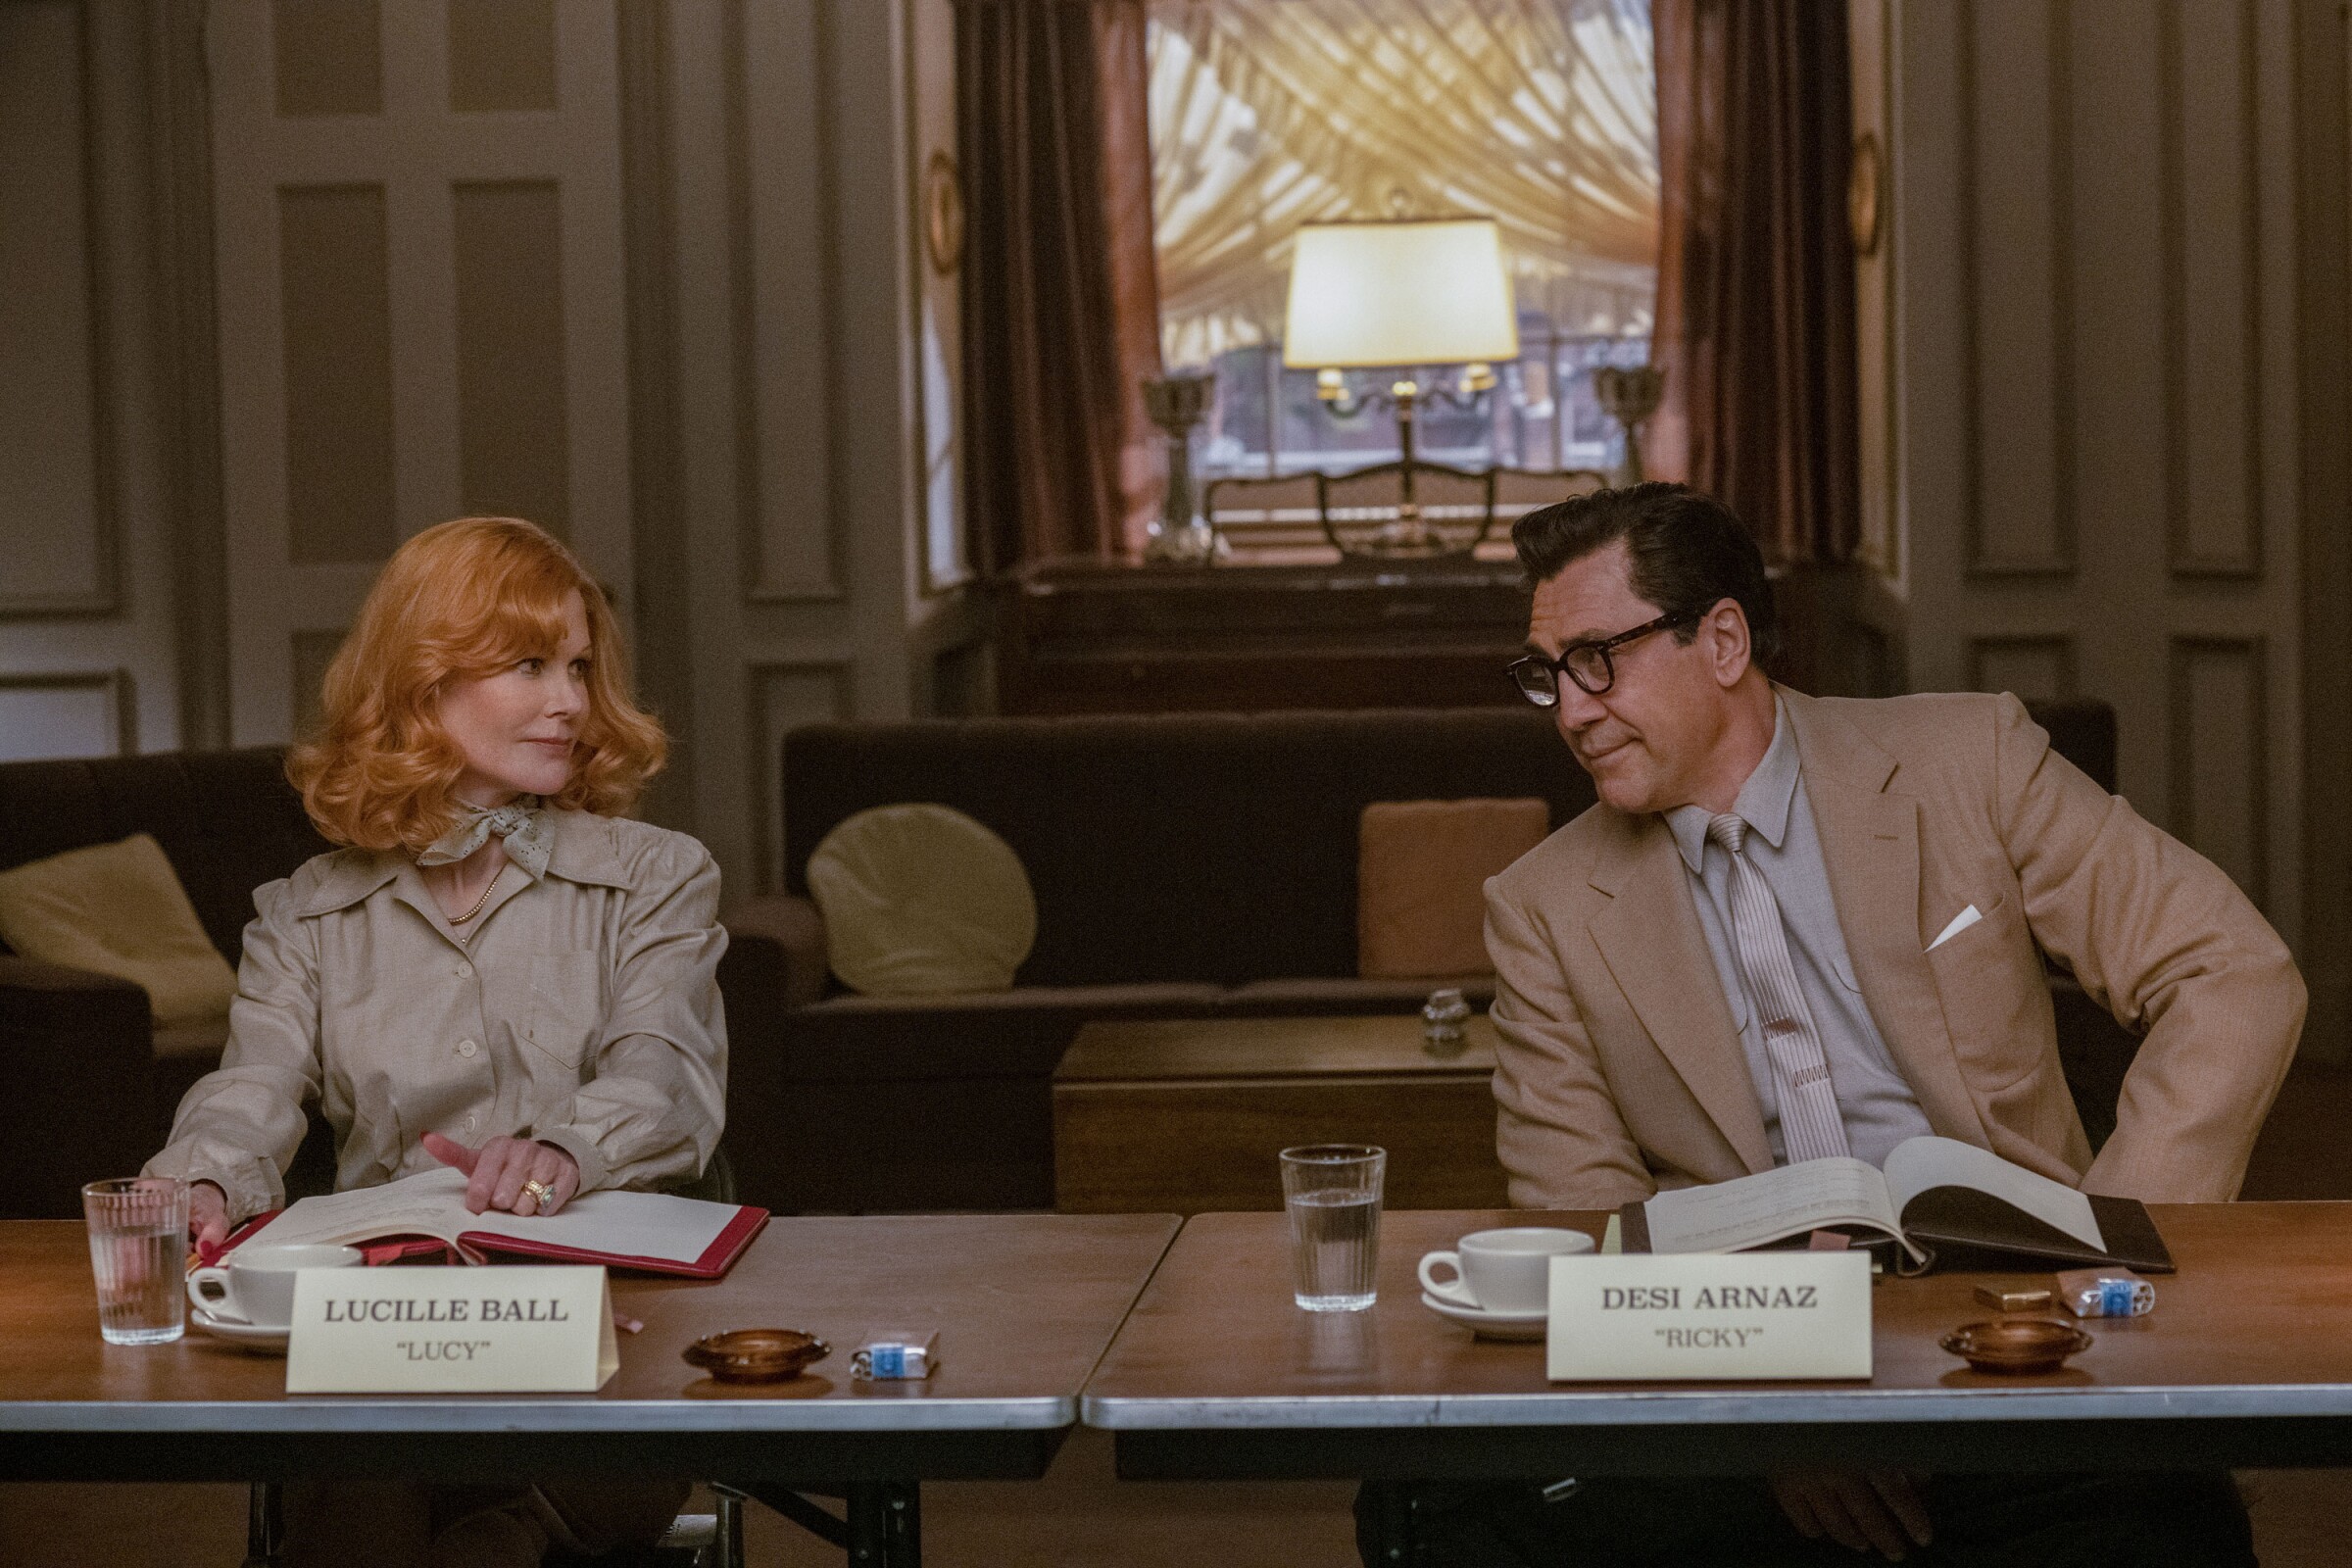 Nicole Kidman as Lucille Ball and Javier Bardem as Desi Arnaz at a table read in "Being the Ricardos."